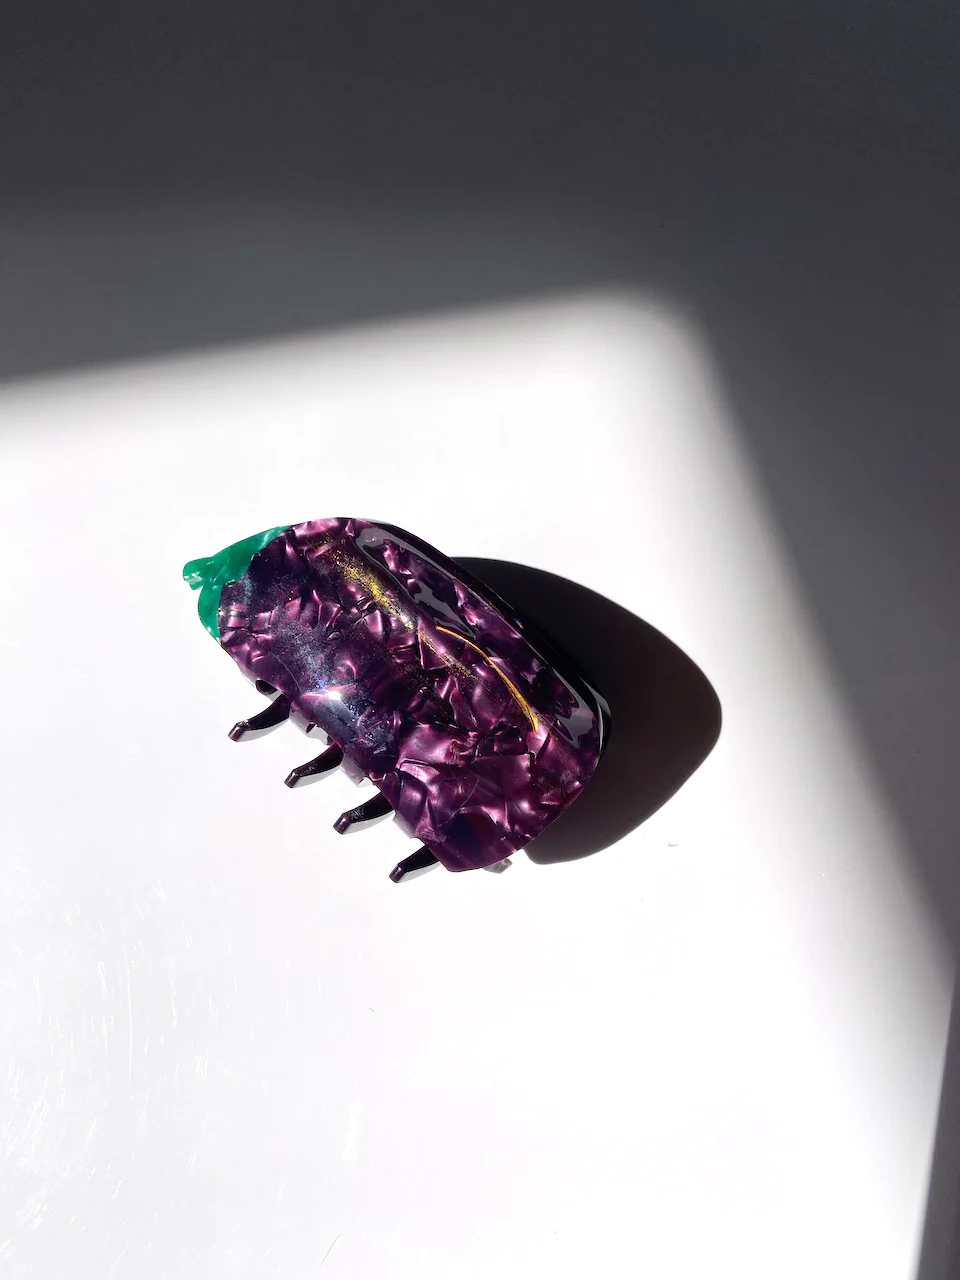 A MARBELED PURPLE CLAW CLIP WITH A GREEN TOP MADE TO LOOK LIKE AND EGGPLANT. THE CLIP SITS ON A WHITE BACKGROUND WHICH SHOWS THE DEPTH OF COLOR. 